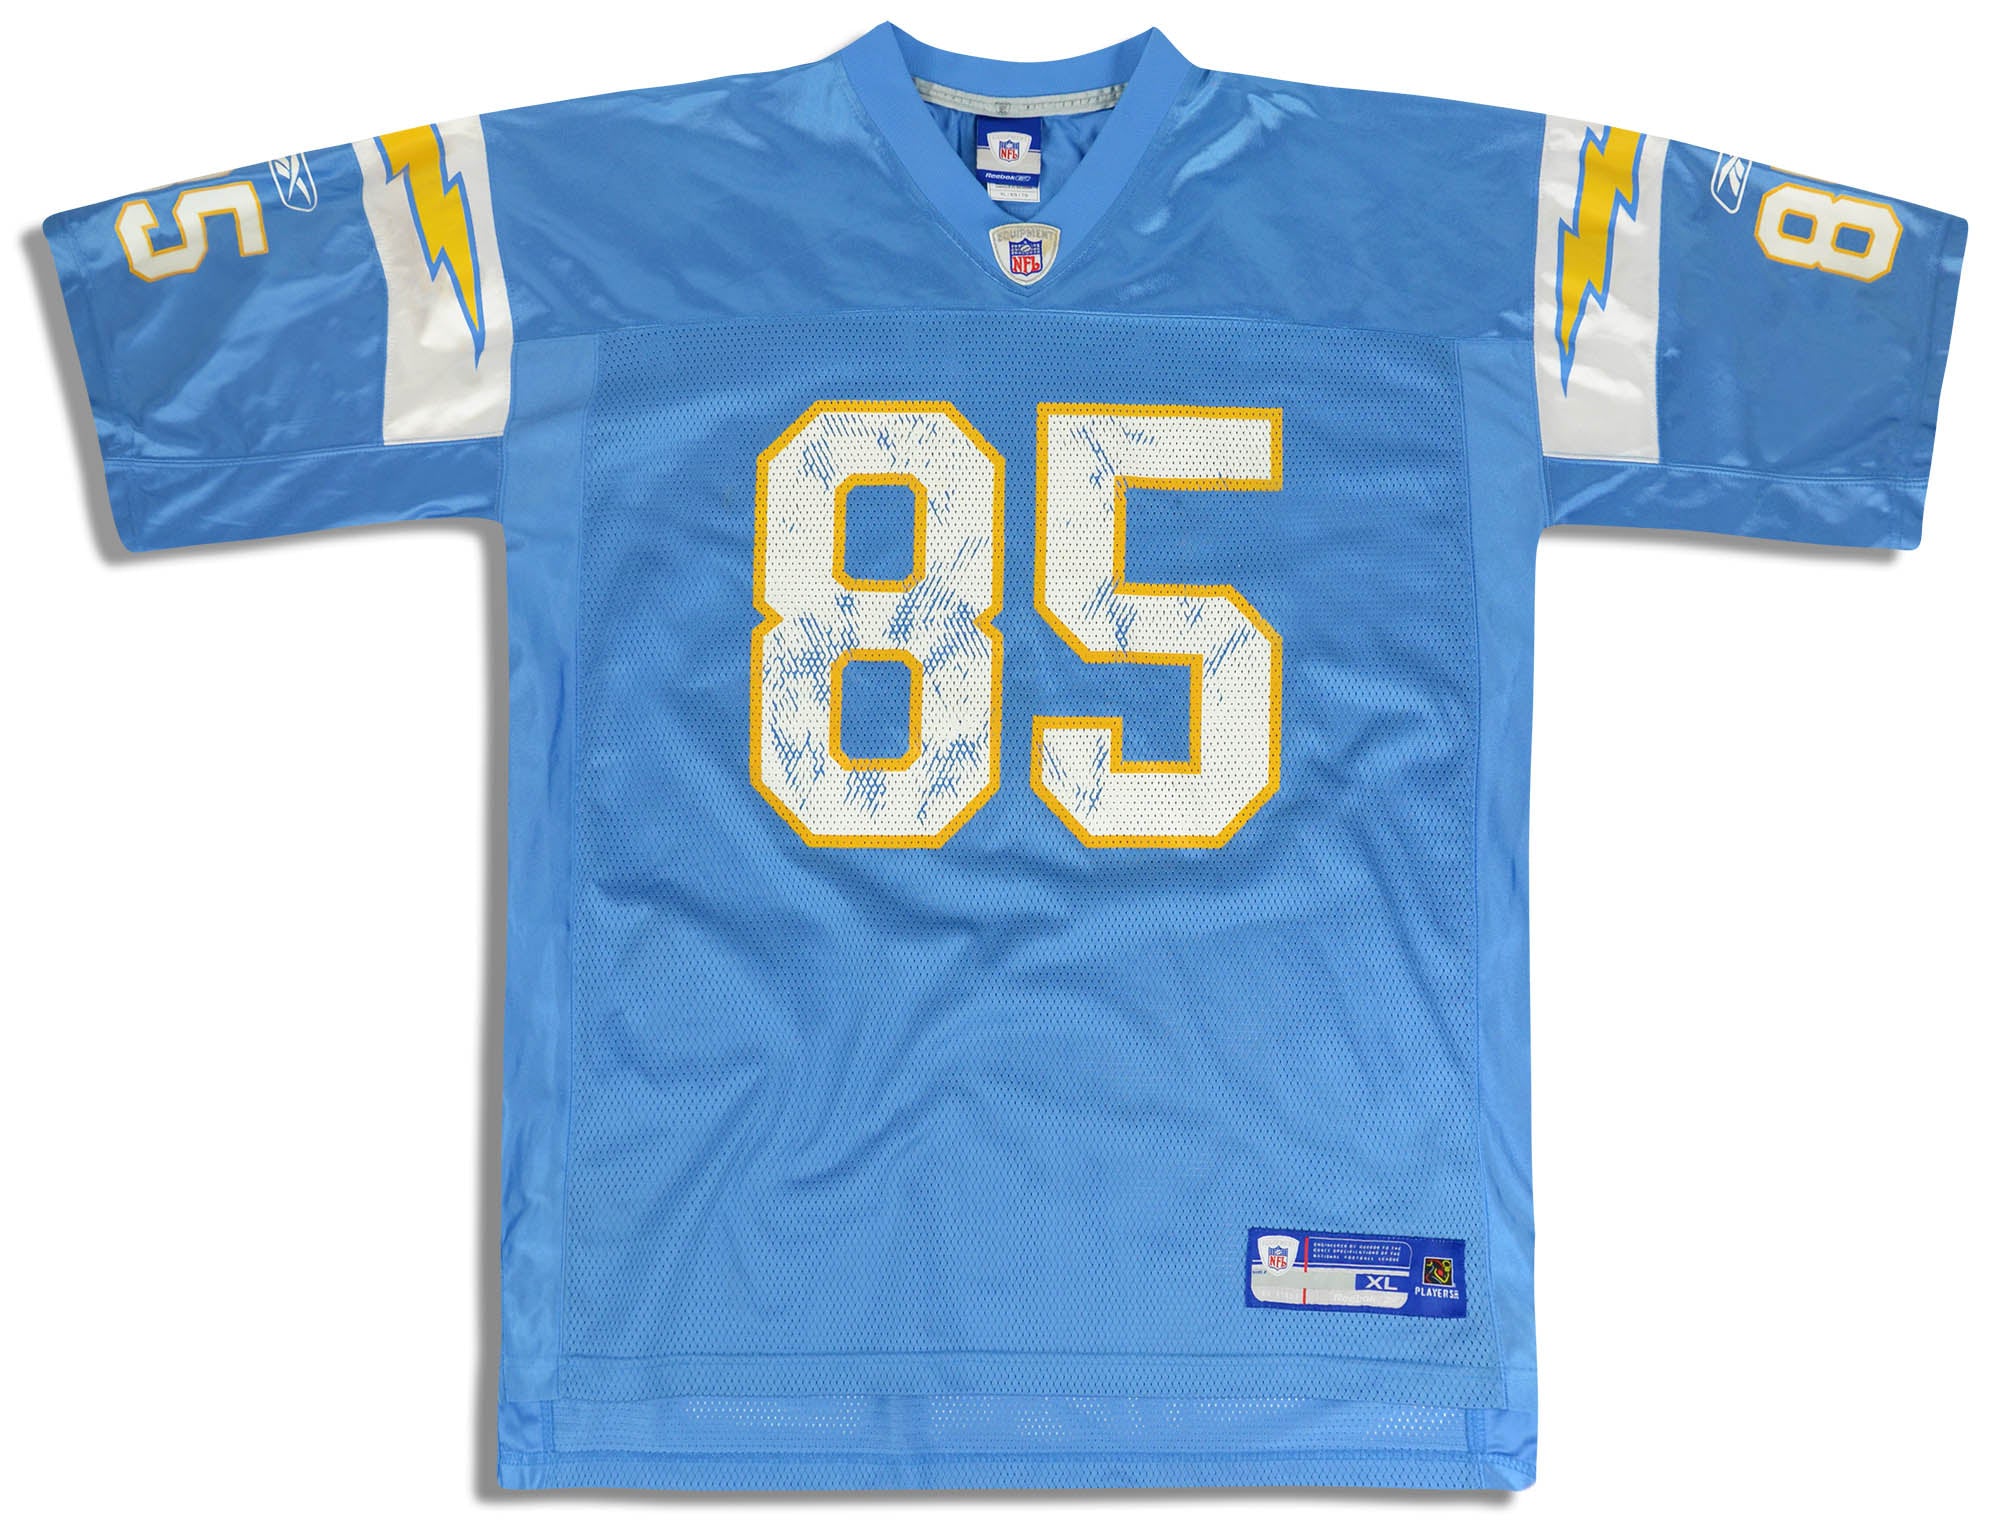 San Diego Chargers Reebok On Field Drew Brees Home Jersey Size 2XL